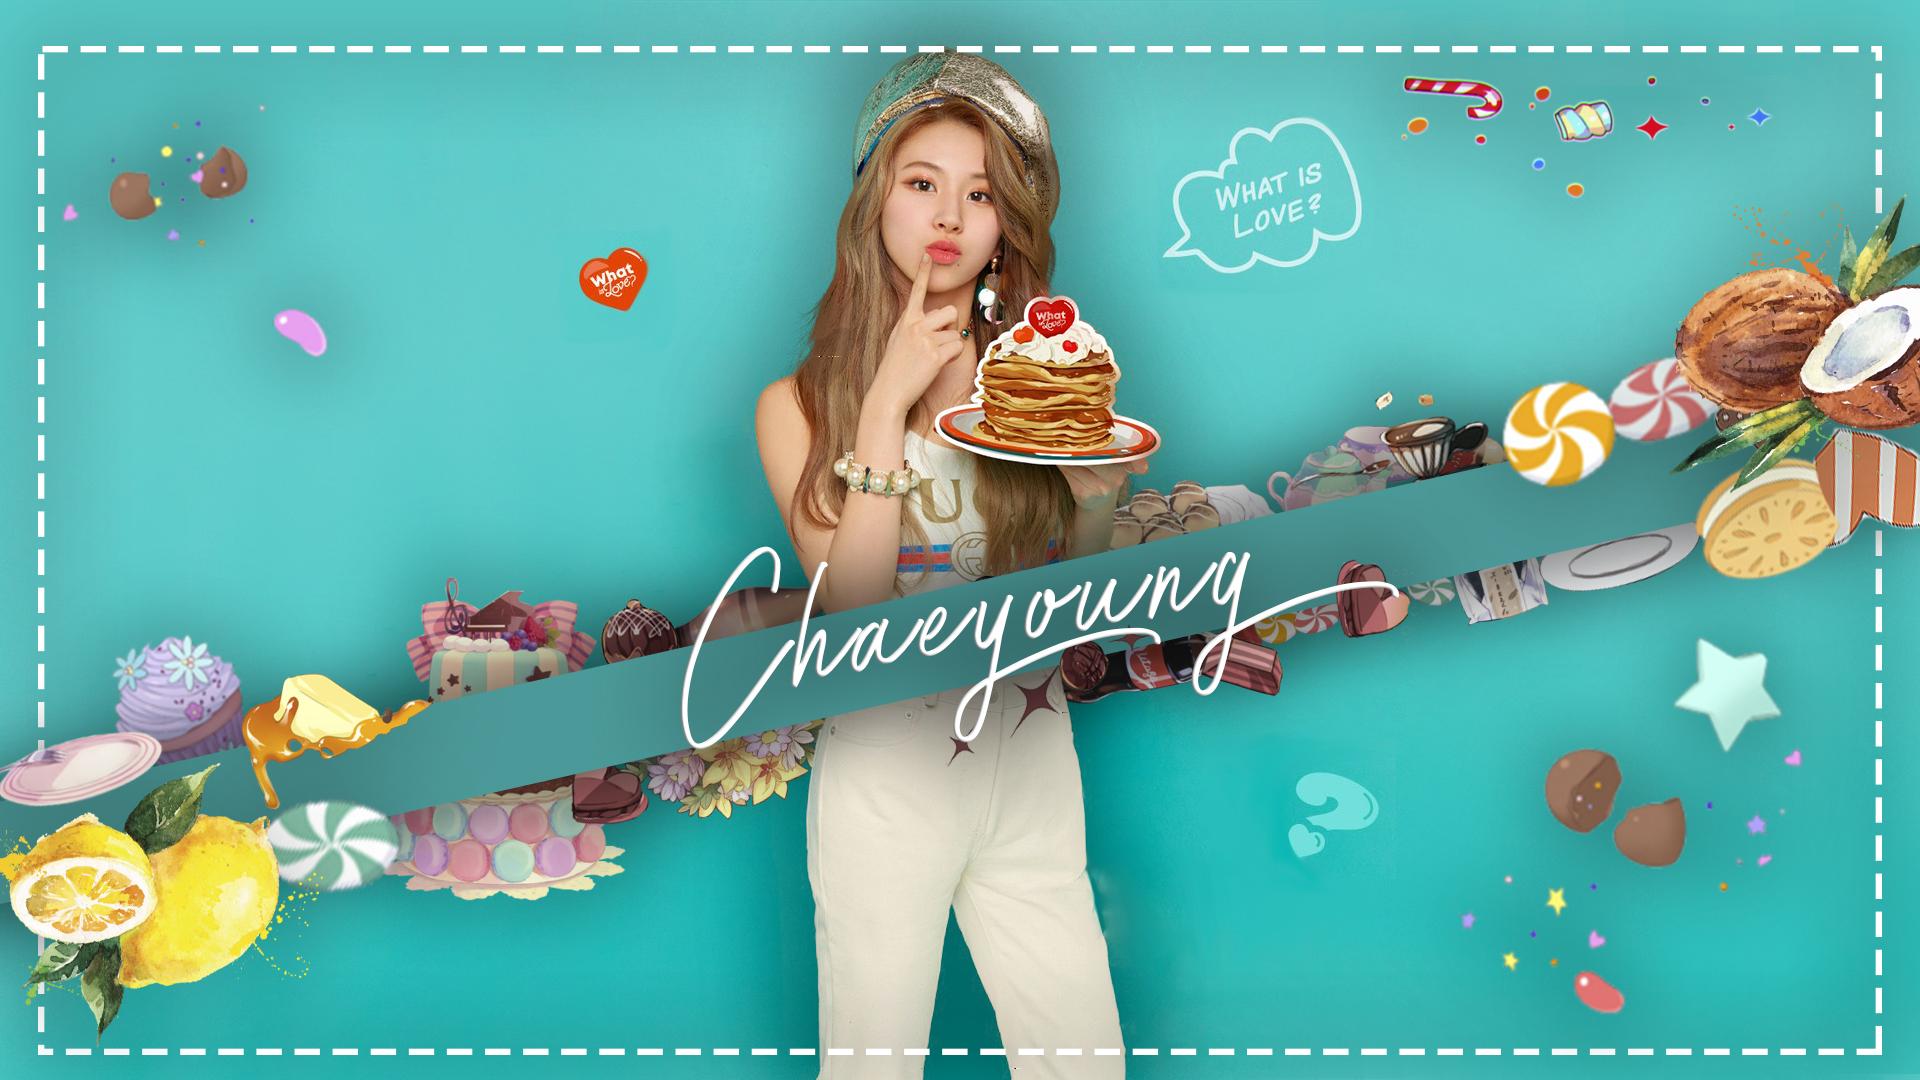 Twice Chaeyoung What Is Love - HD Wallpaper 